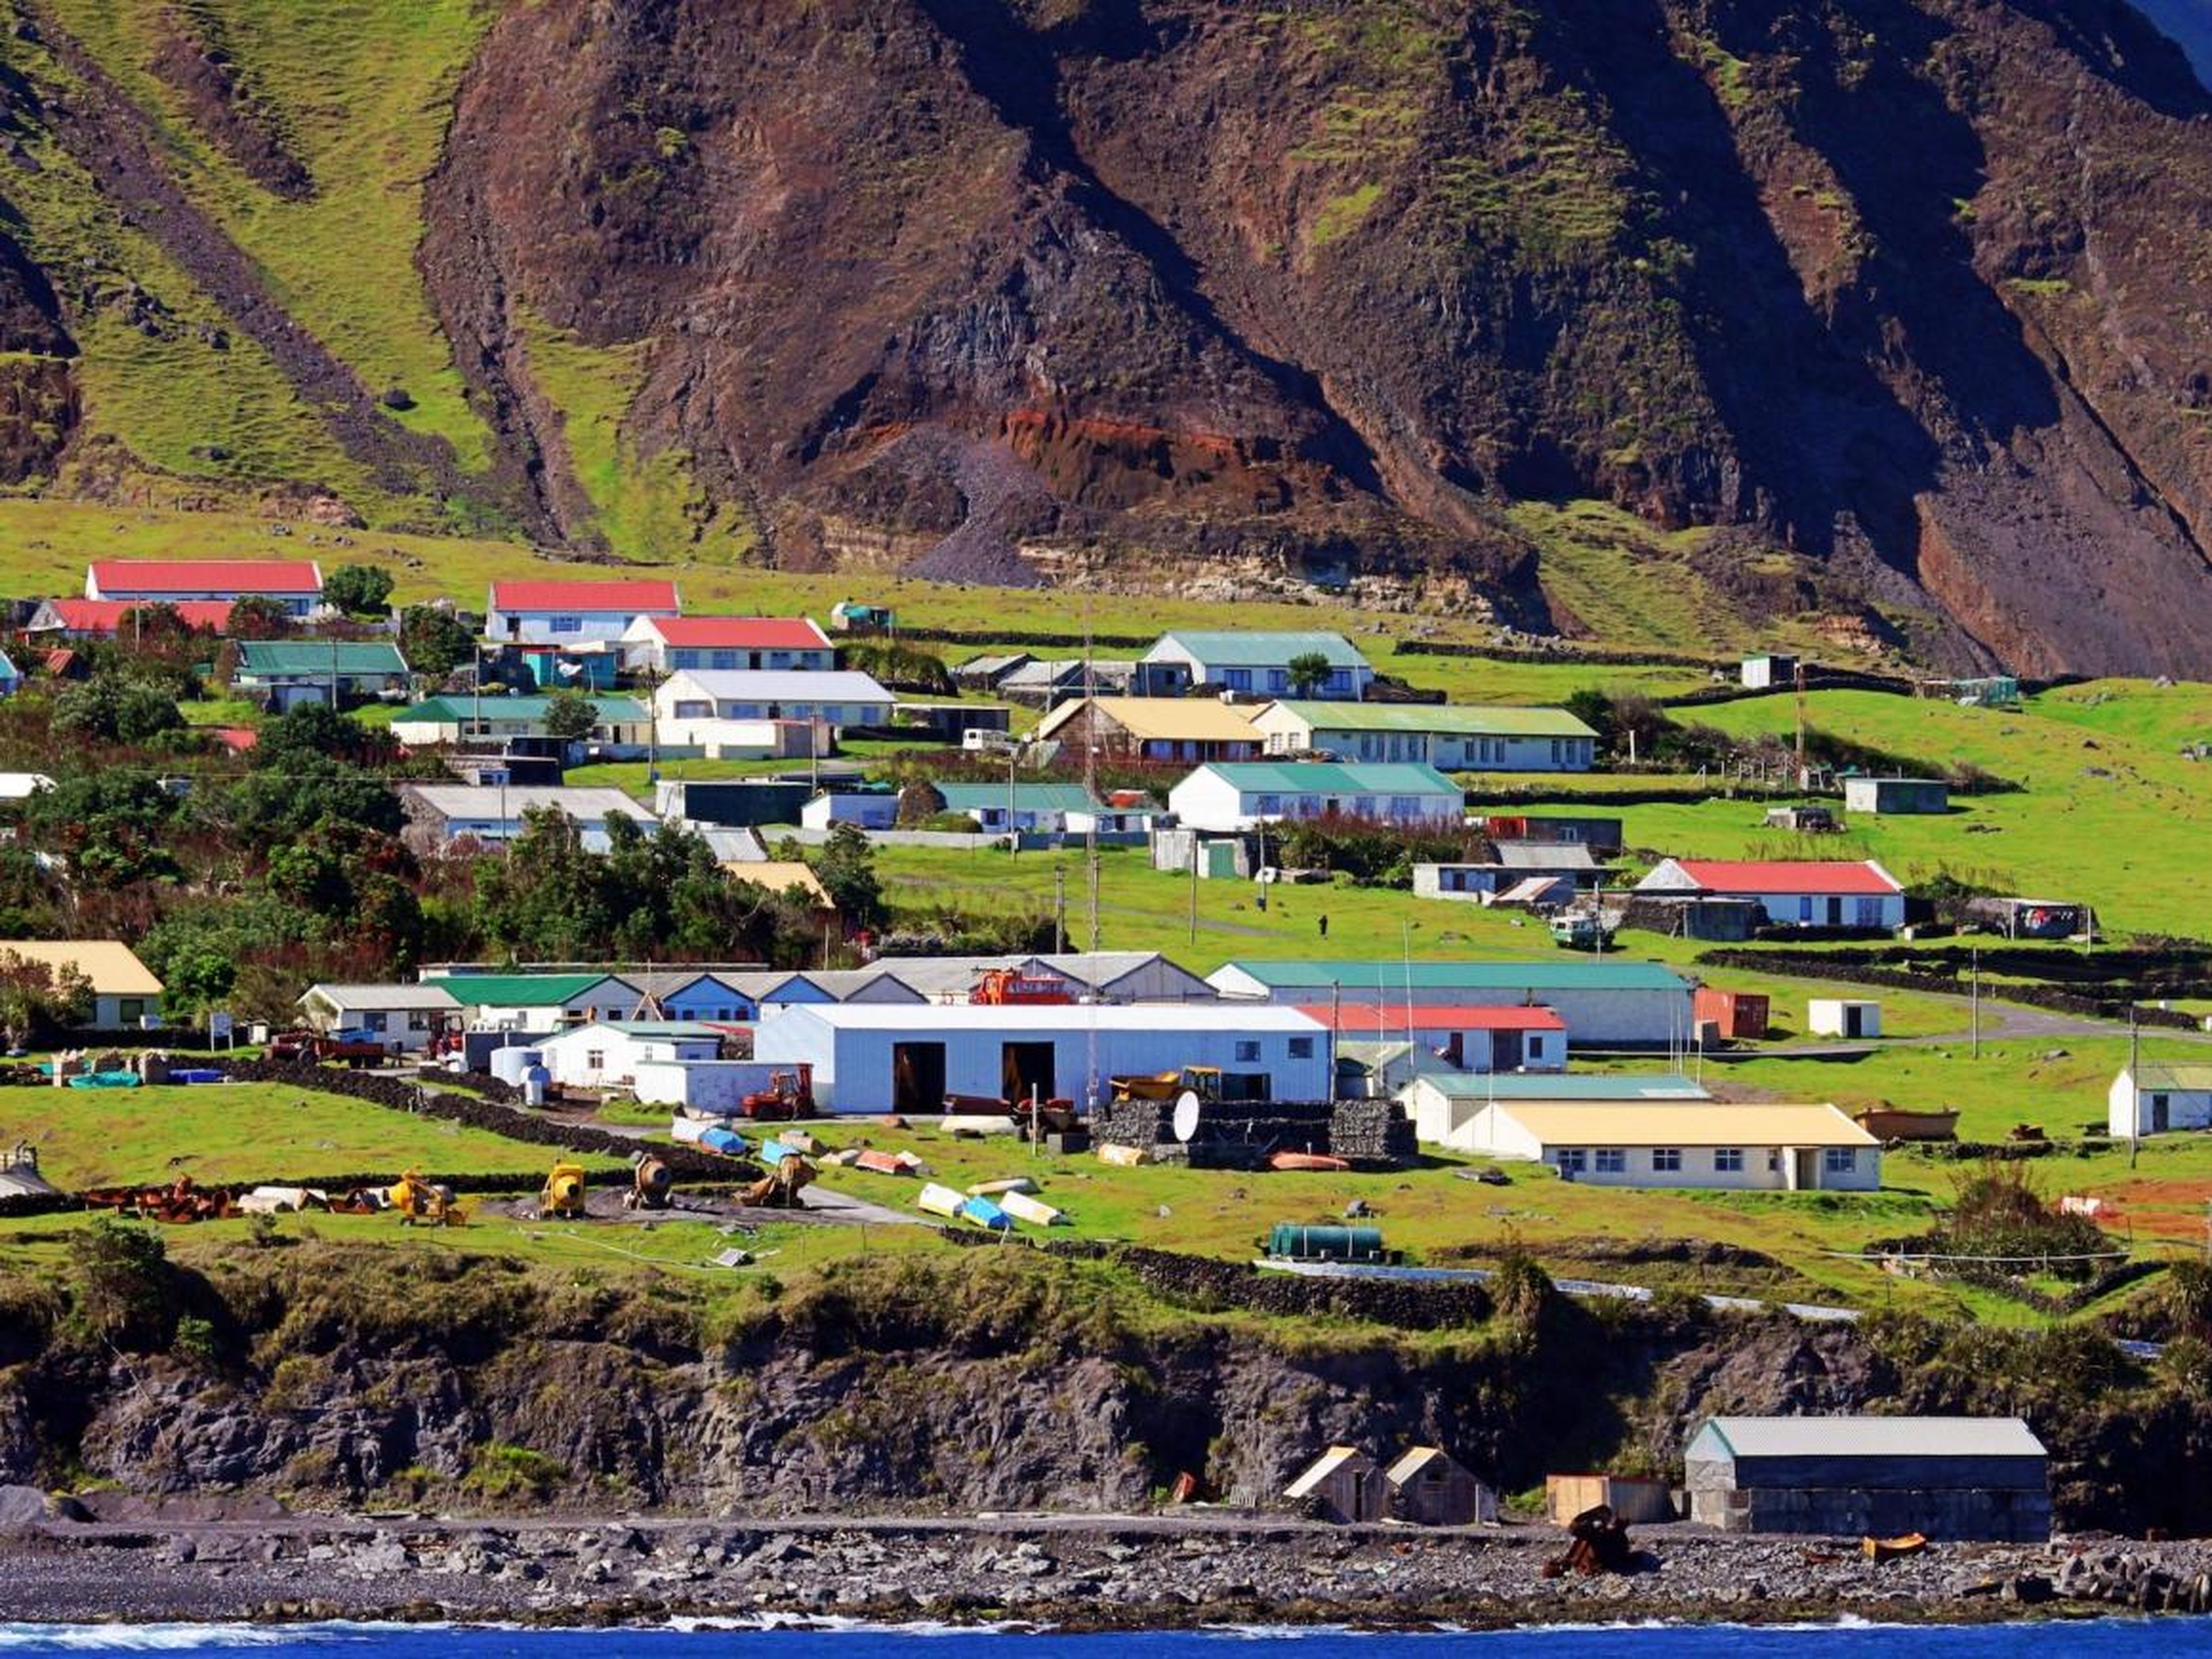 Some islanders open up their homes to visitors on a homestay basis. They collect 75% of the guest fees while the other 25% goes to the government.